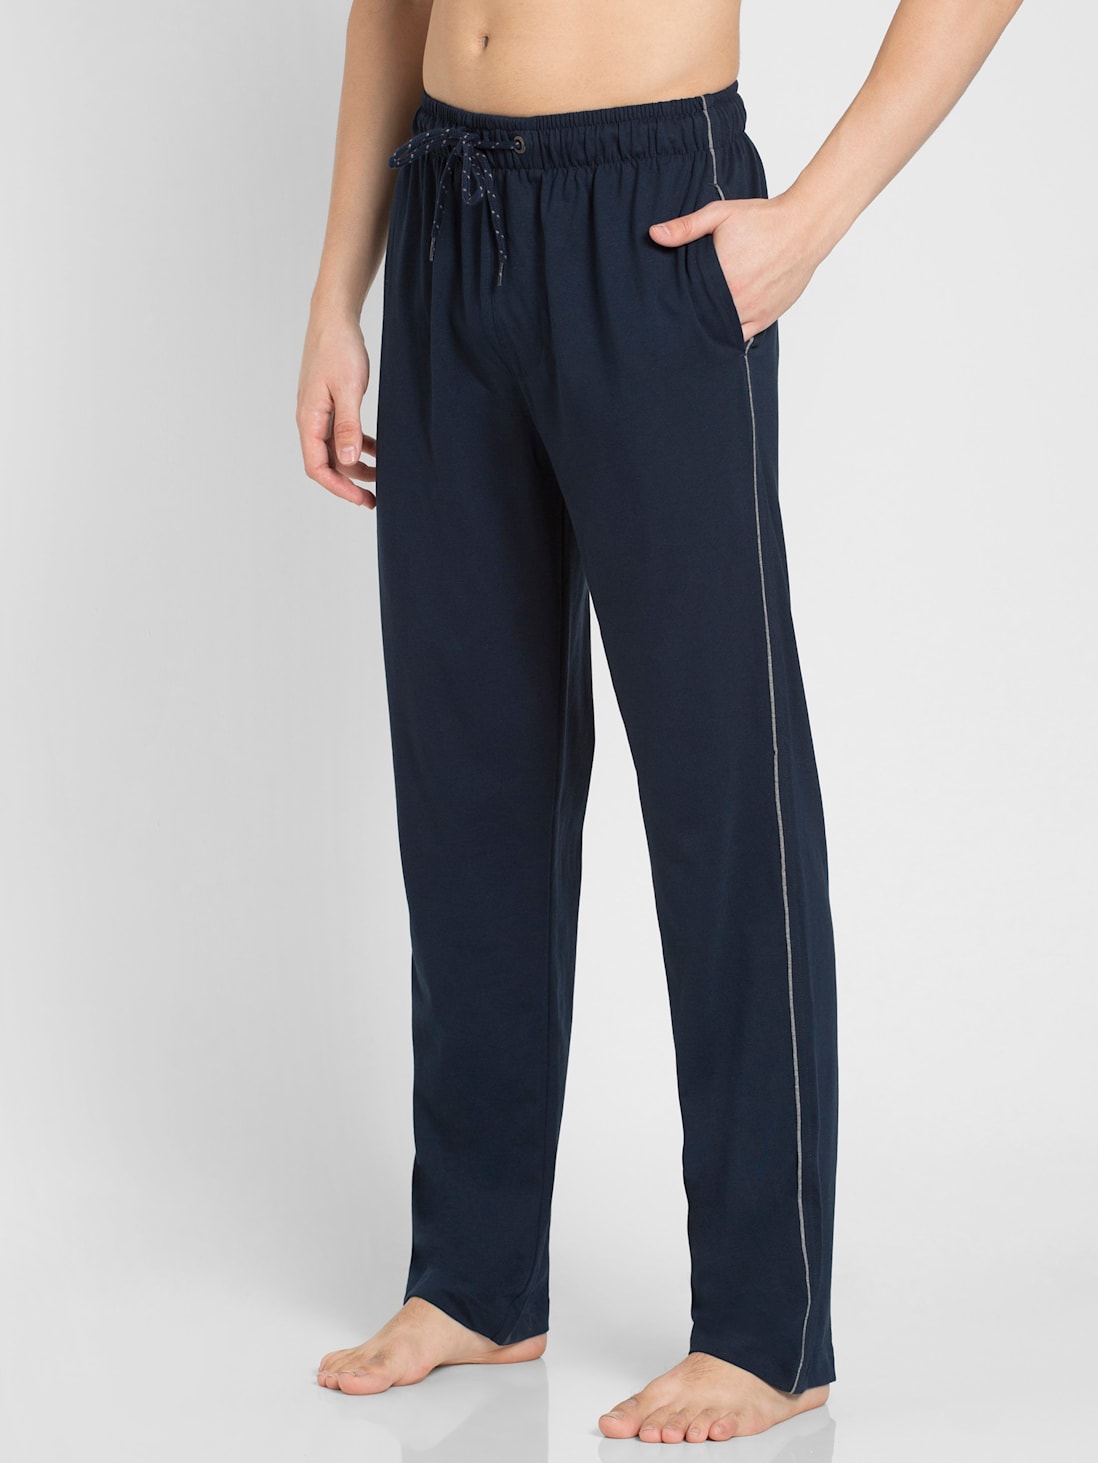 Jockey Womens Cotton Elastane Stretch Slim Fit Track pants  Online  Shopping site in India